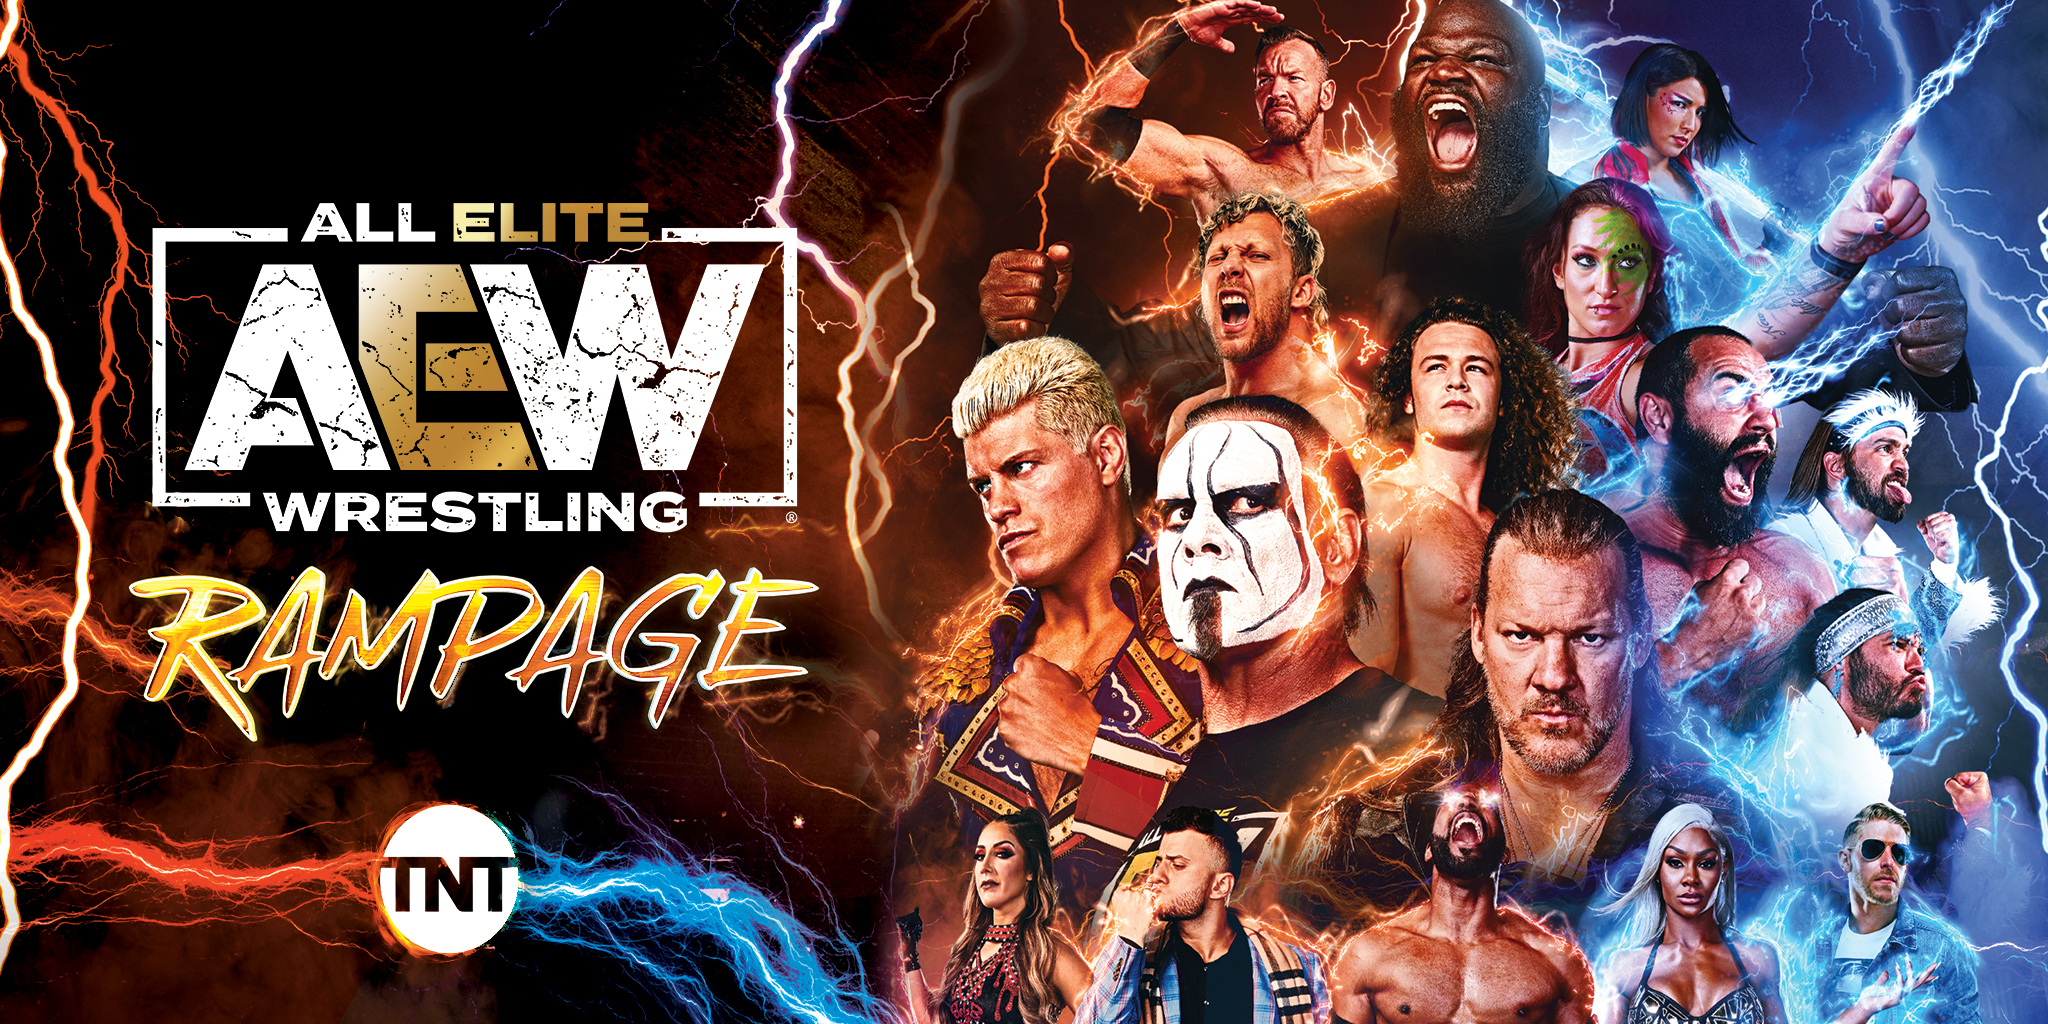 Aew S Biggest Stars Take Their Feuds To Friday Nights As Aew Rampage Debuts This Week First Comics News [ 1024 x 2048 Pixel ]